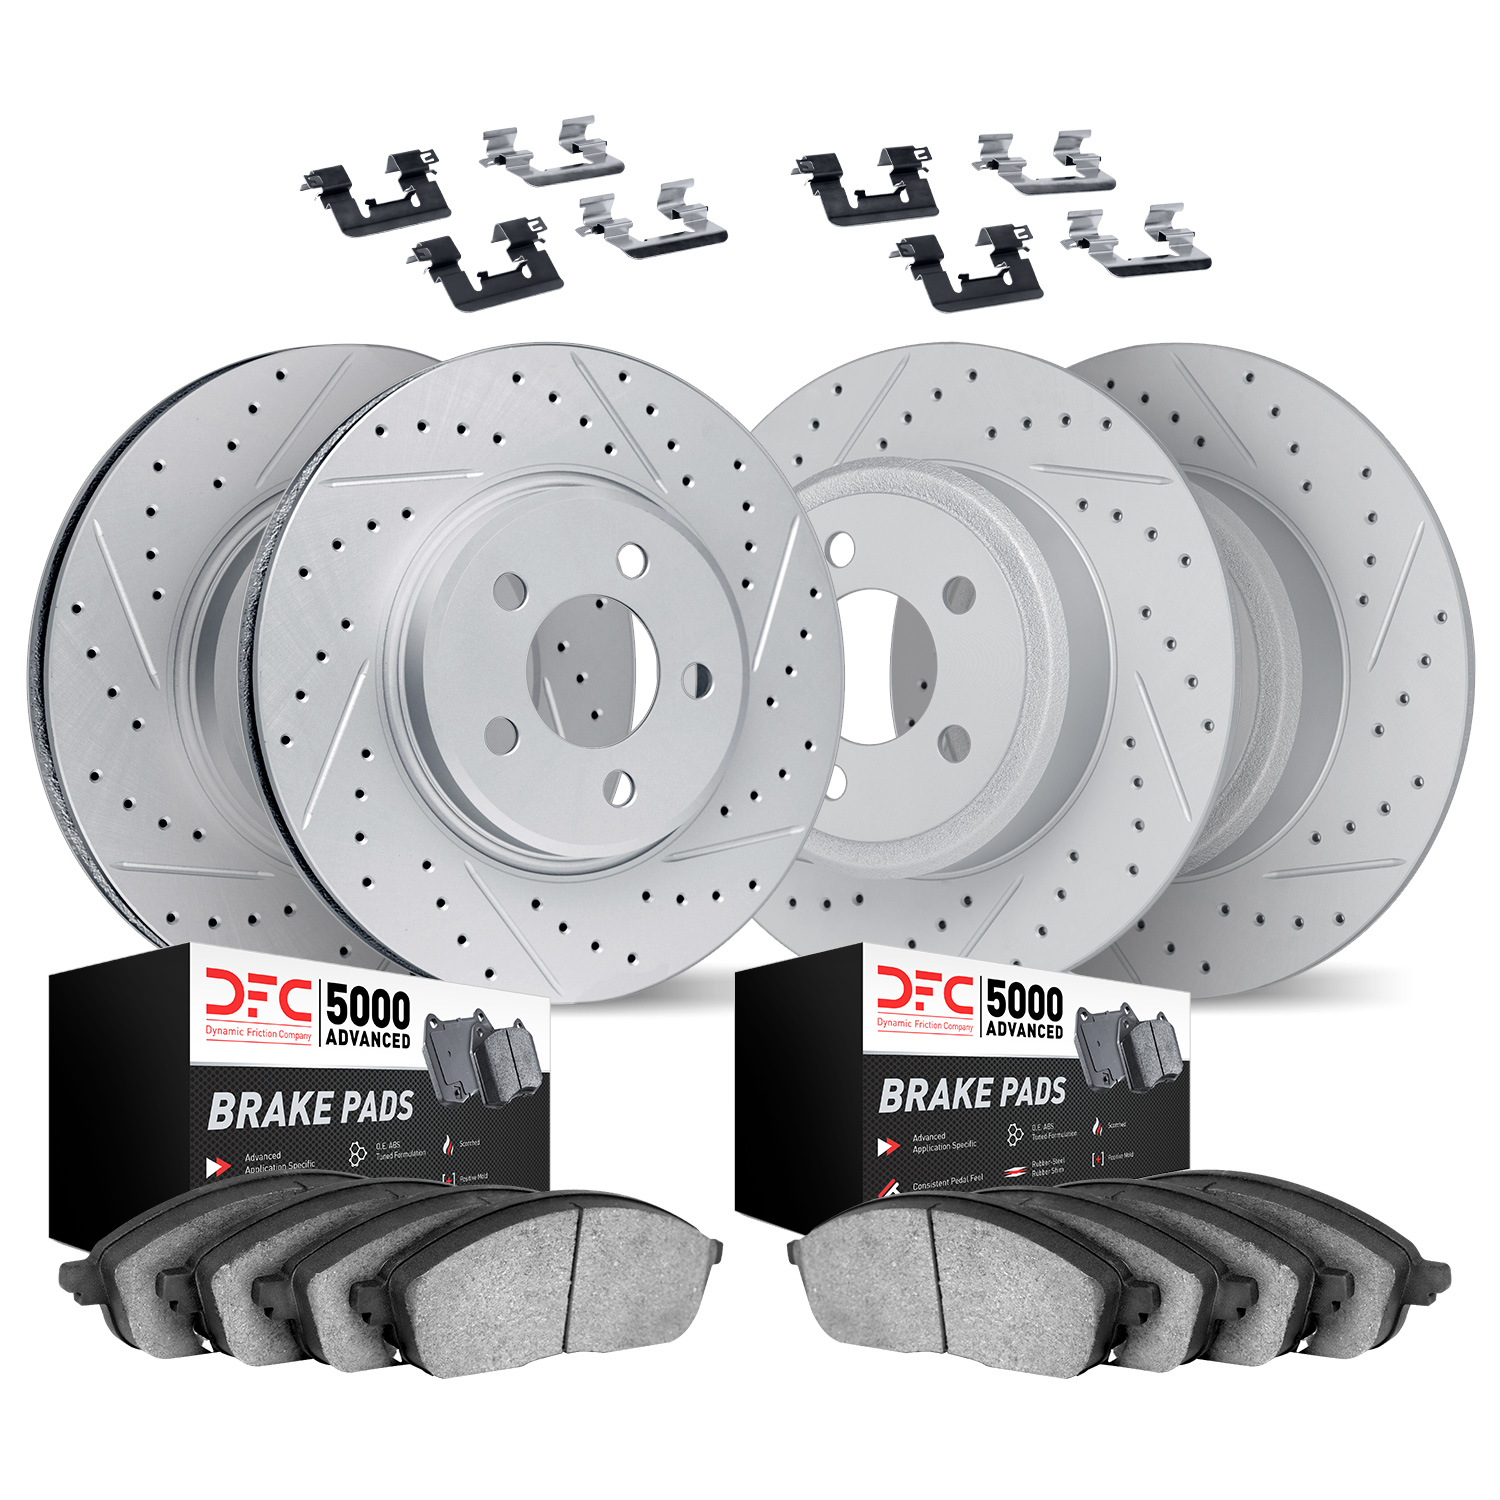 2514-45020 Geoperformance Drilled/Slotted Rotors w/5000 Advanced Brake Pads Kit & Hardware, Fits Select GM, Position: Front and